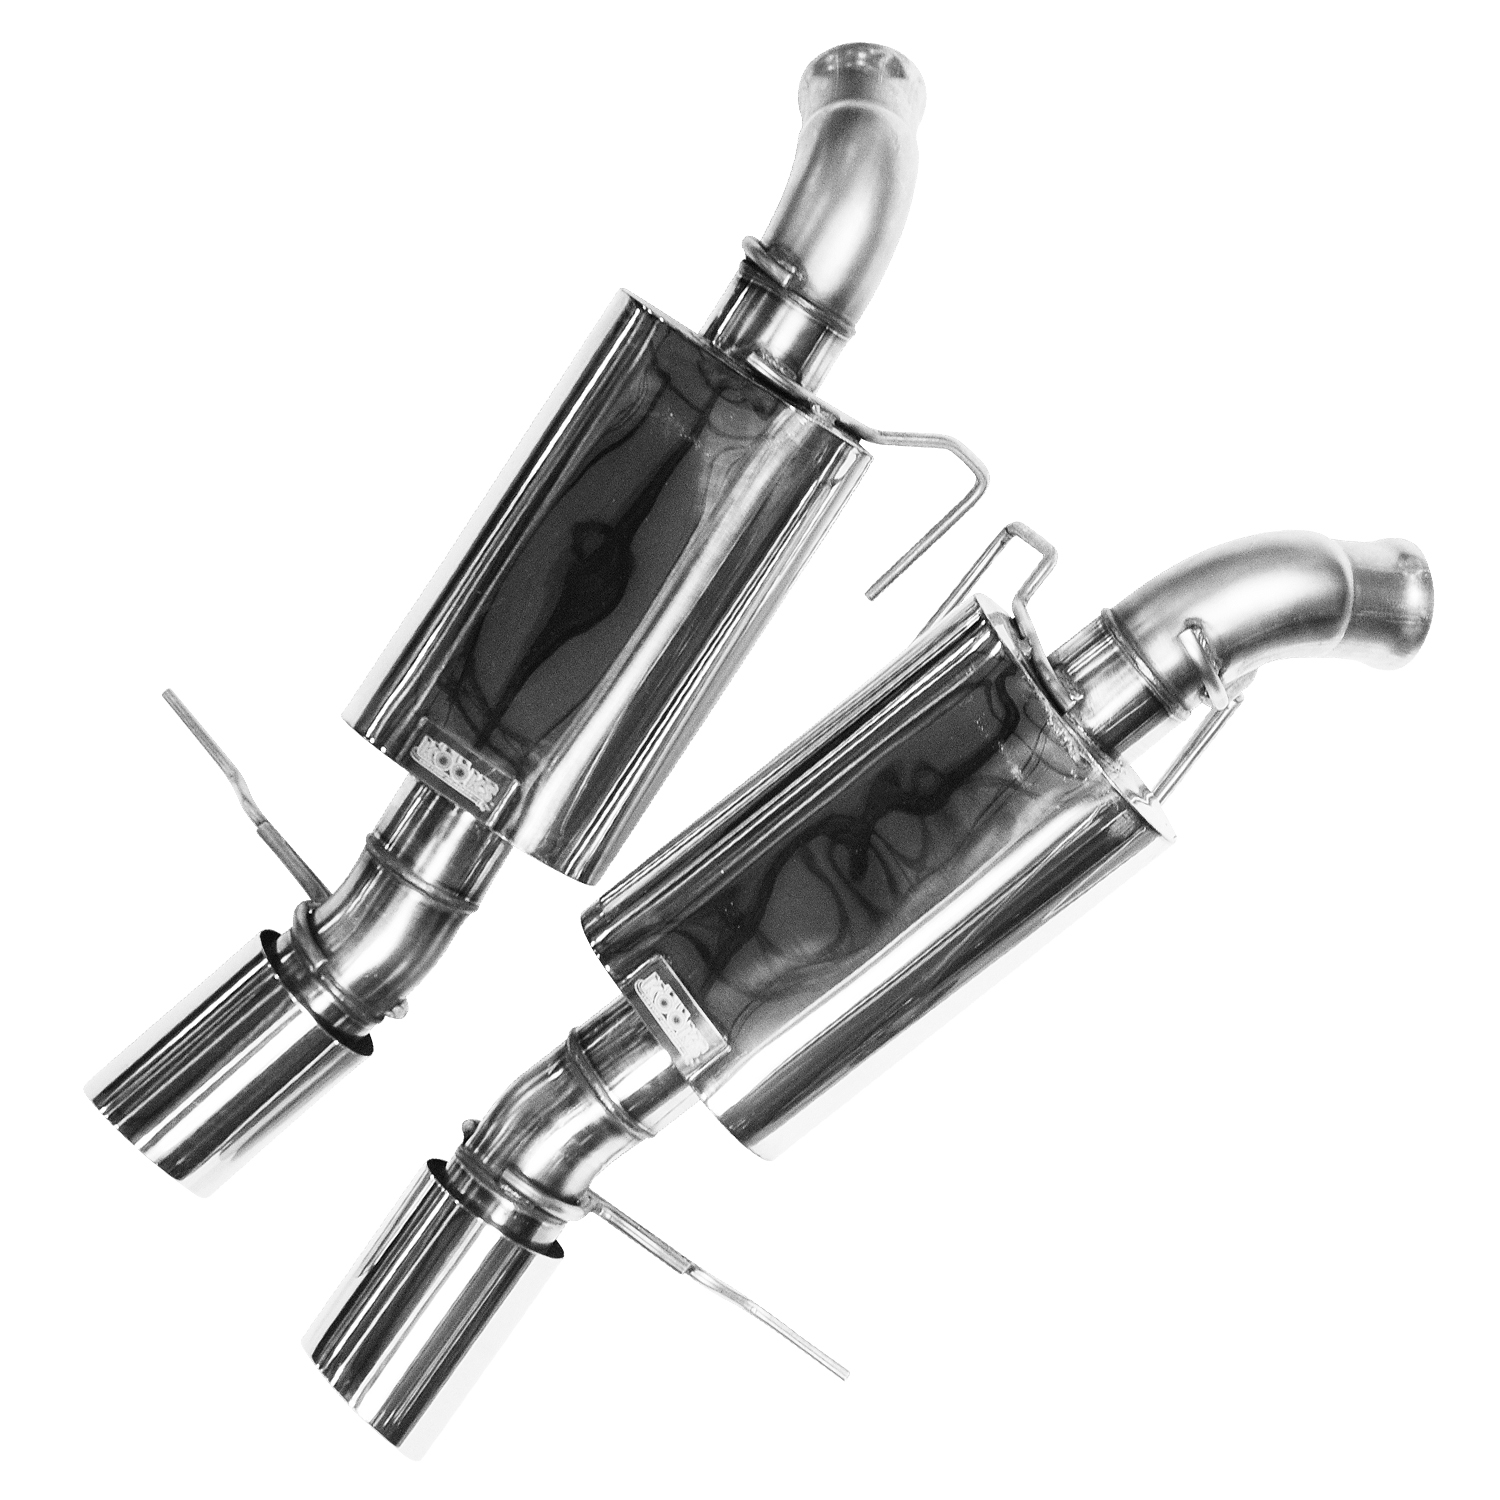 Axle Back Exhaust System 2.75" Inlet x 3" Outlet Incl. Kooks Polished Oval Race Mufflers/4" Polished Slash Cut Tips